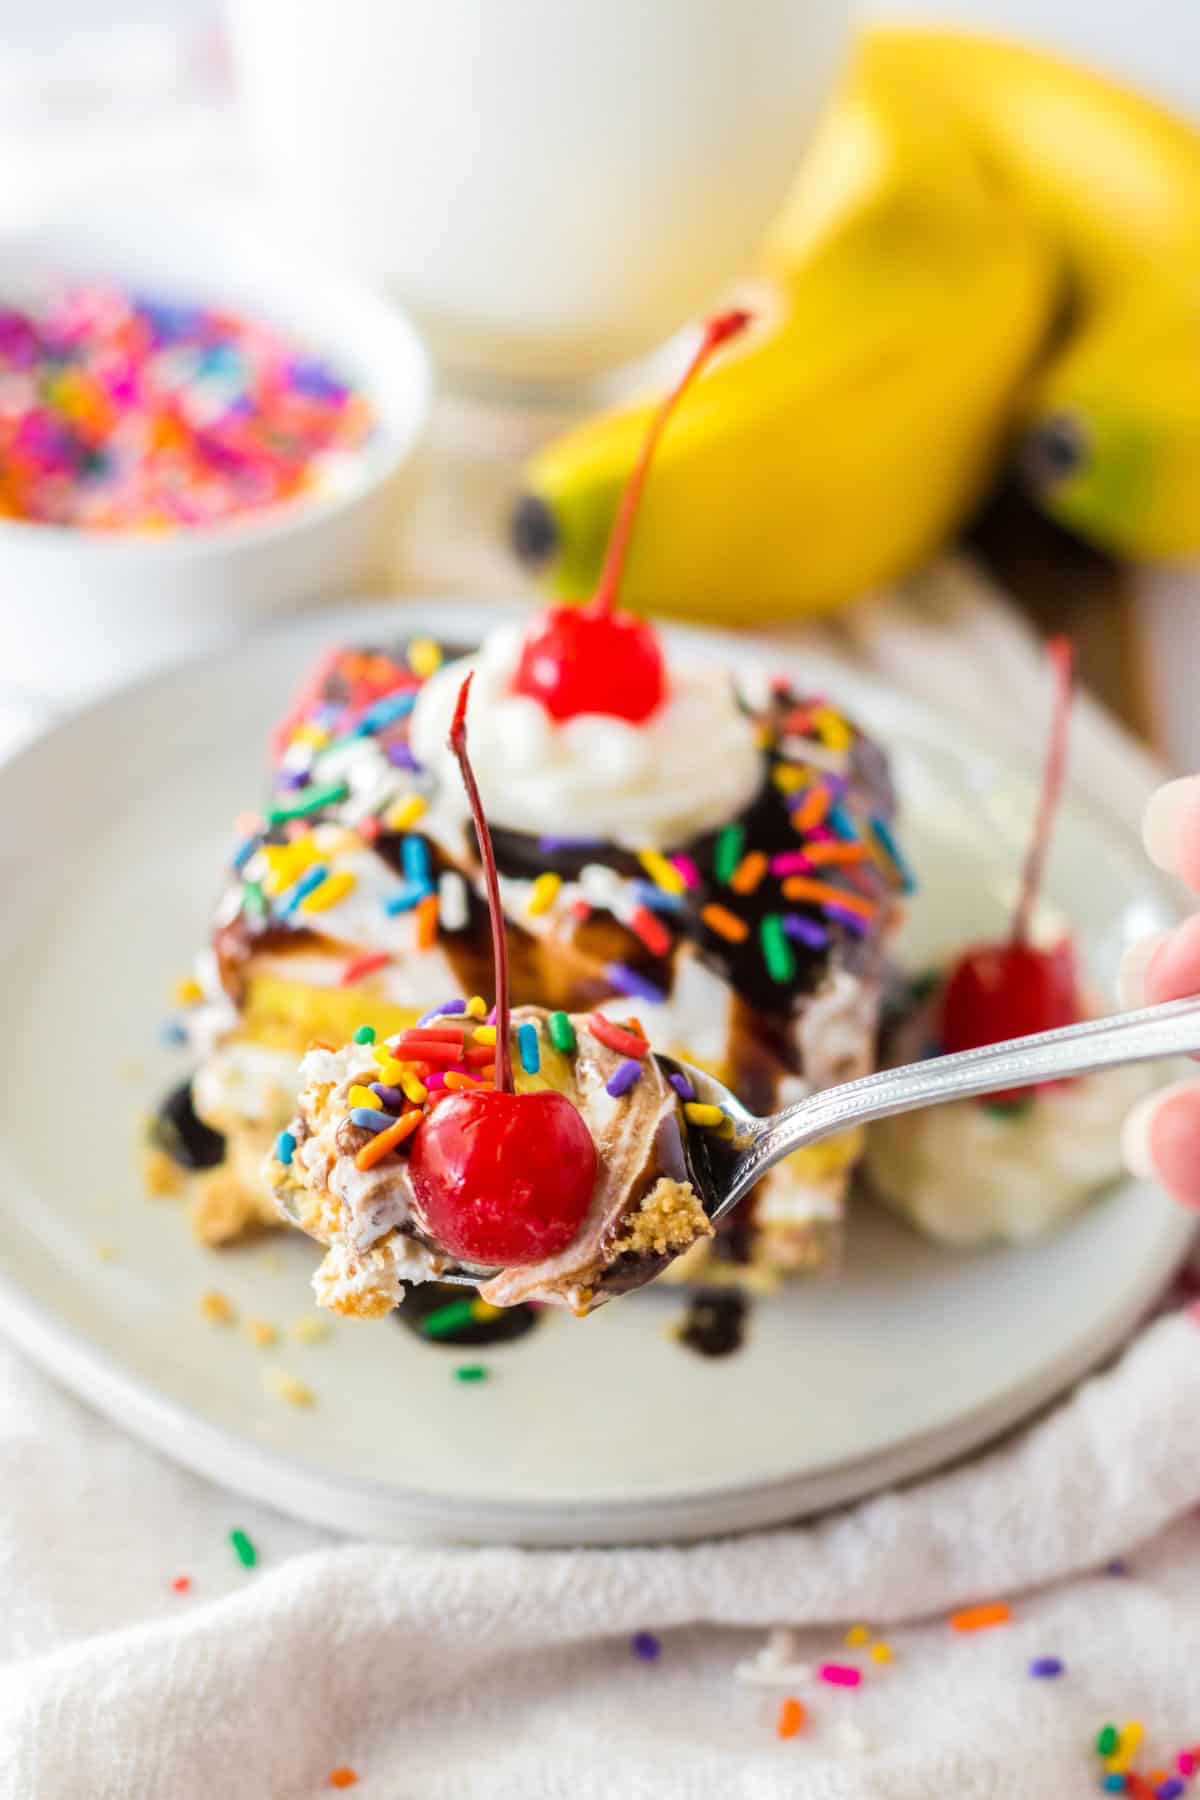 Spoonful of banana pudding lush dessert with slice, bananas, and sprinkles in background.